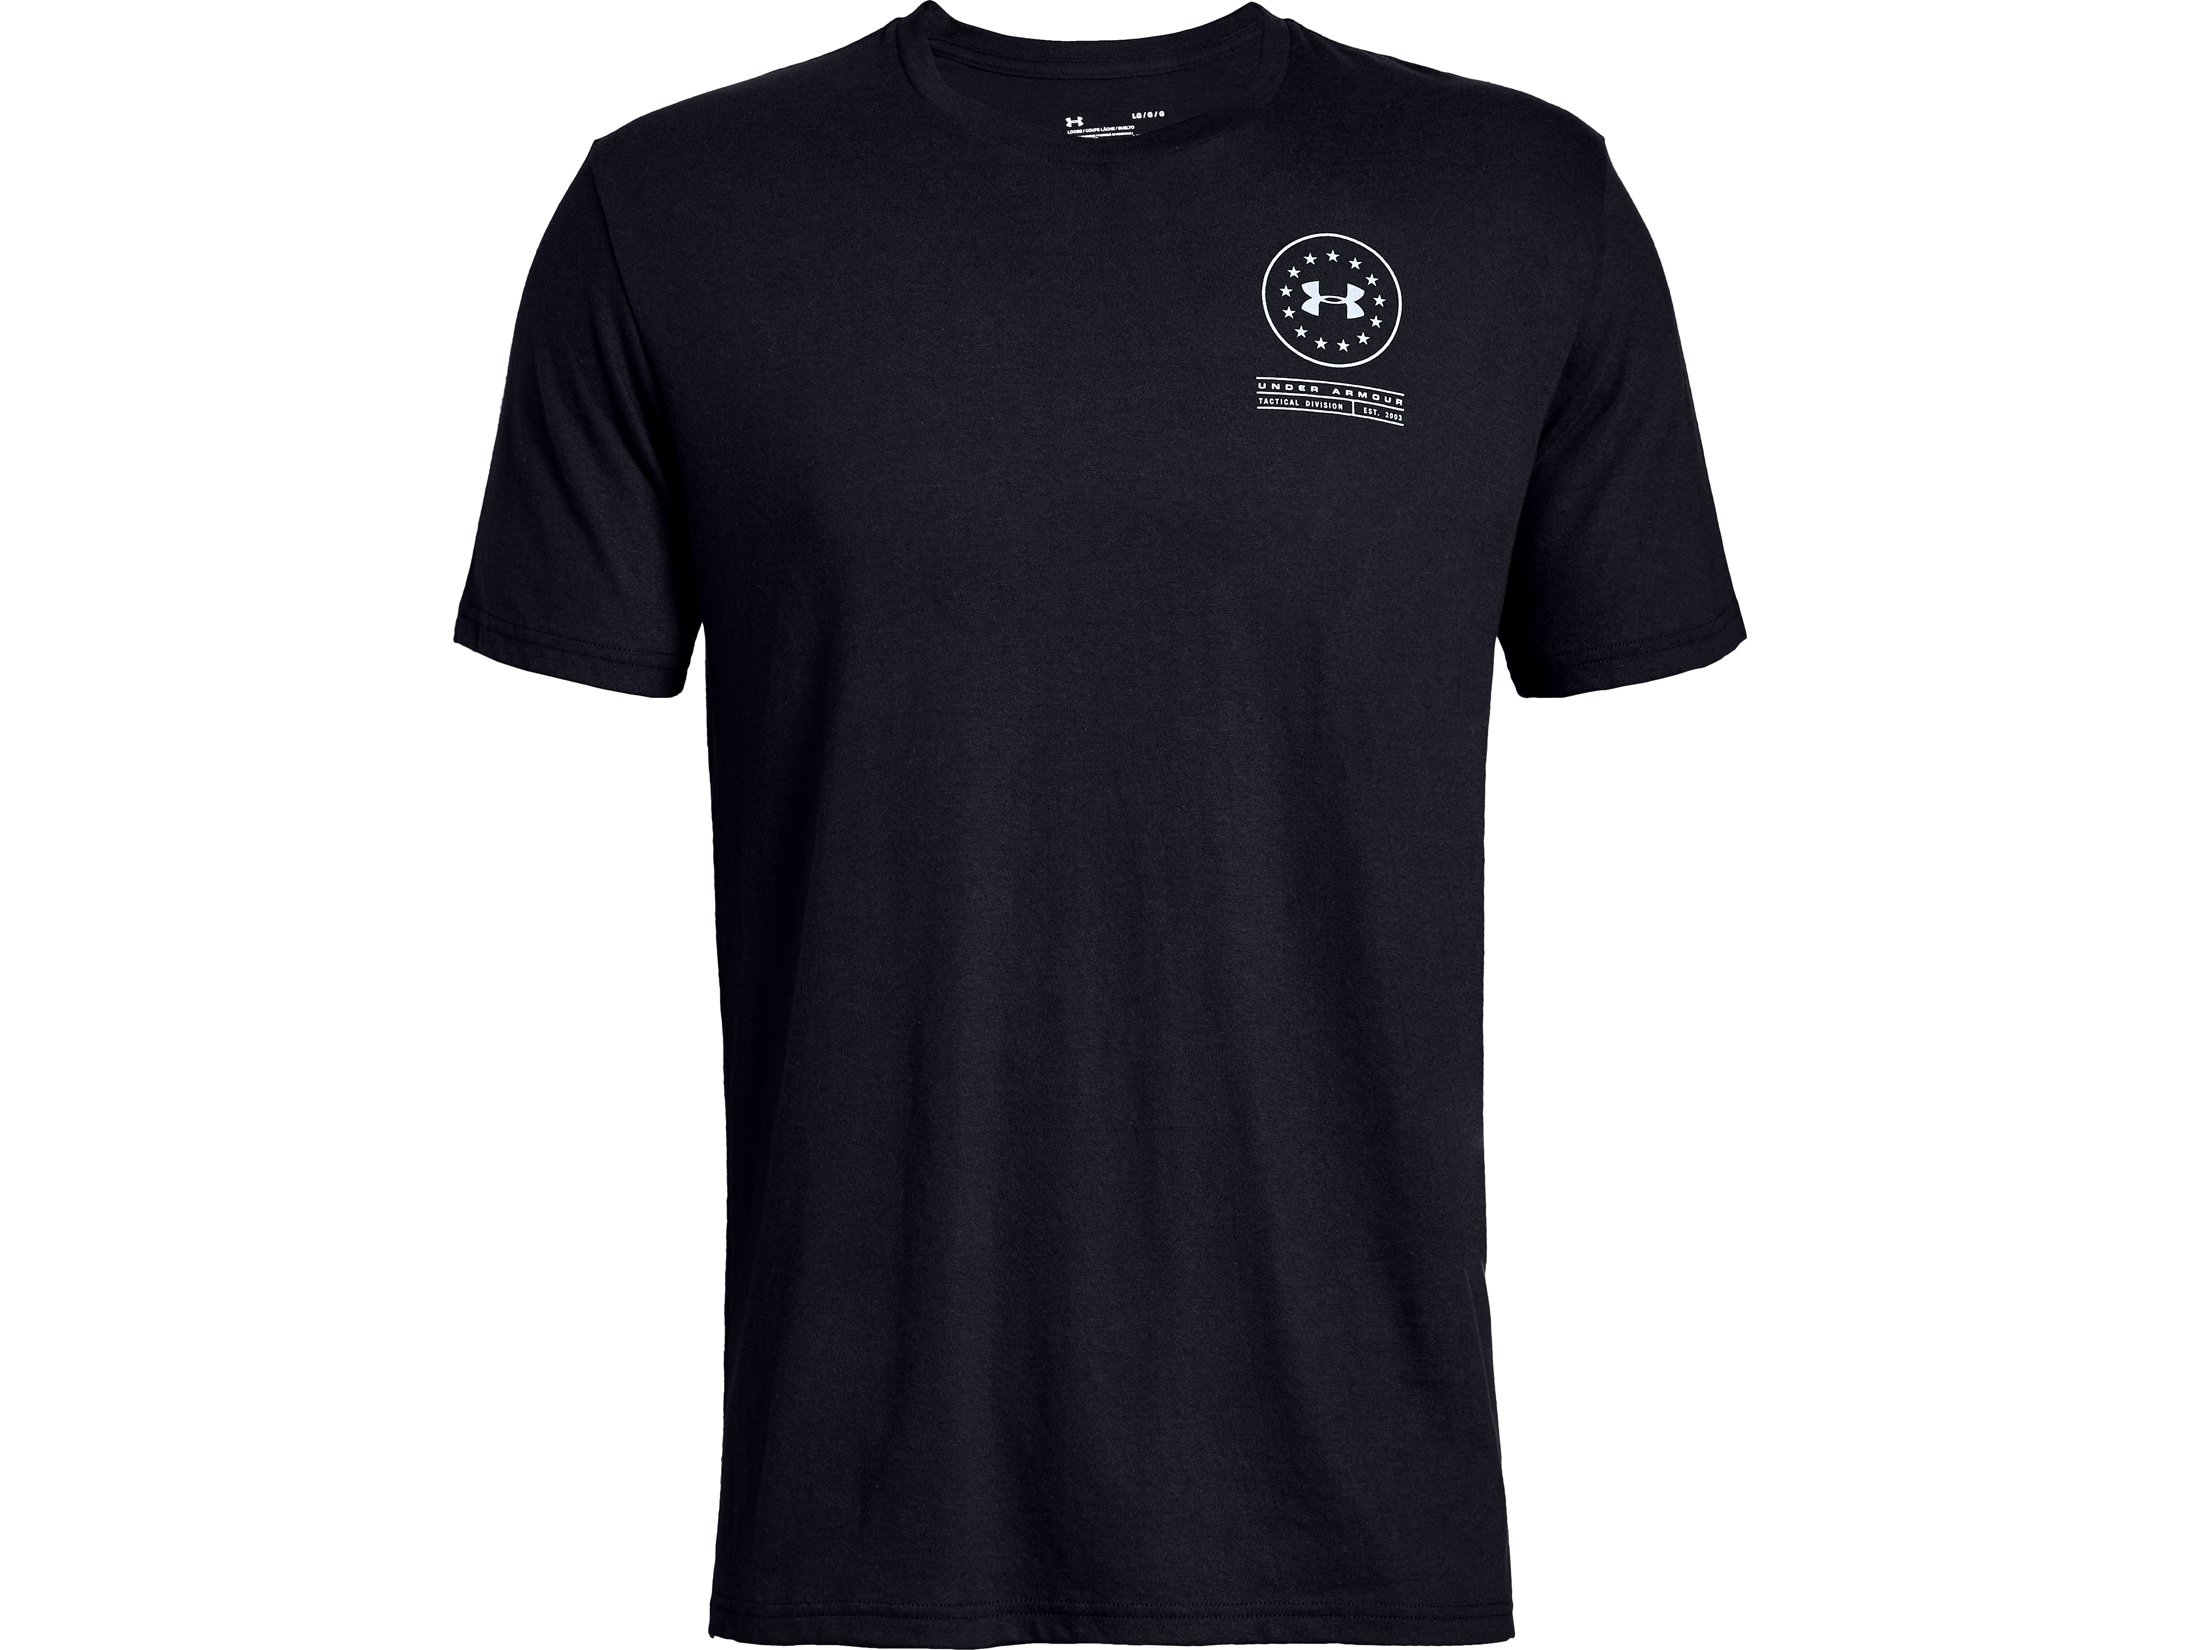 Under Armour Men's Tac Division Short Sleeve T-Shirt Charged Cotton